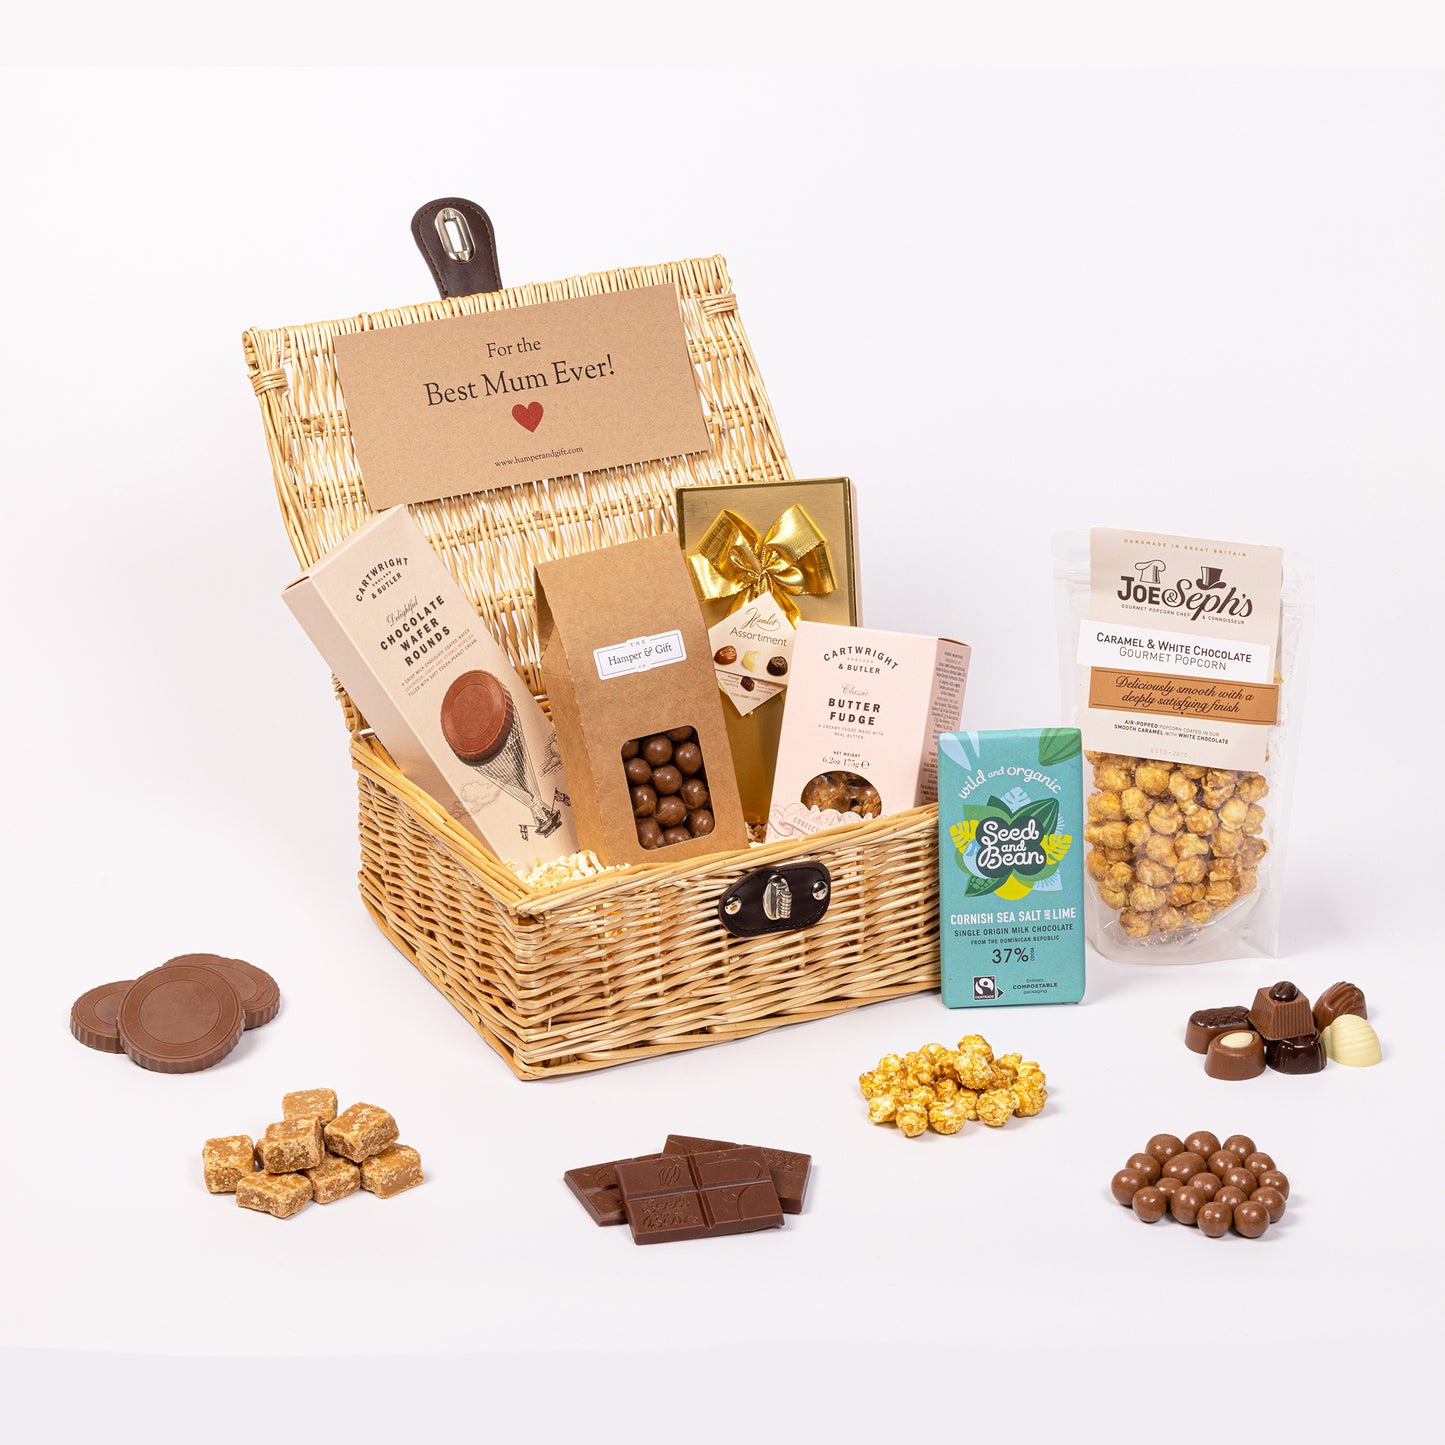 Best Mum Chocolate & Fudge Hamper filled with a variety of chocolate, fudge, biscuit and gourmet popcorn